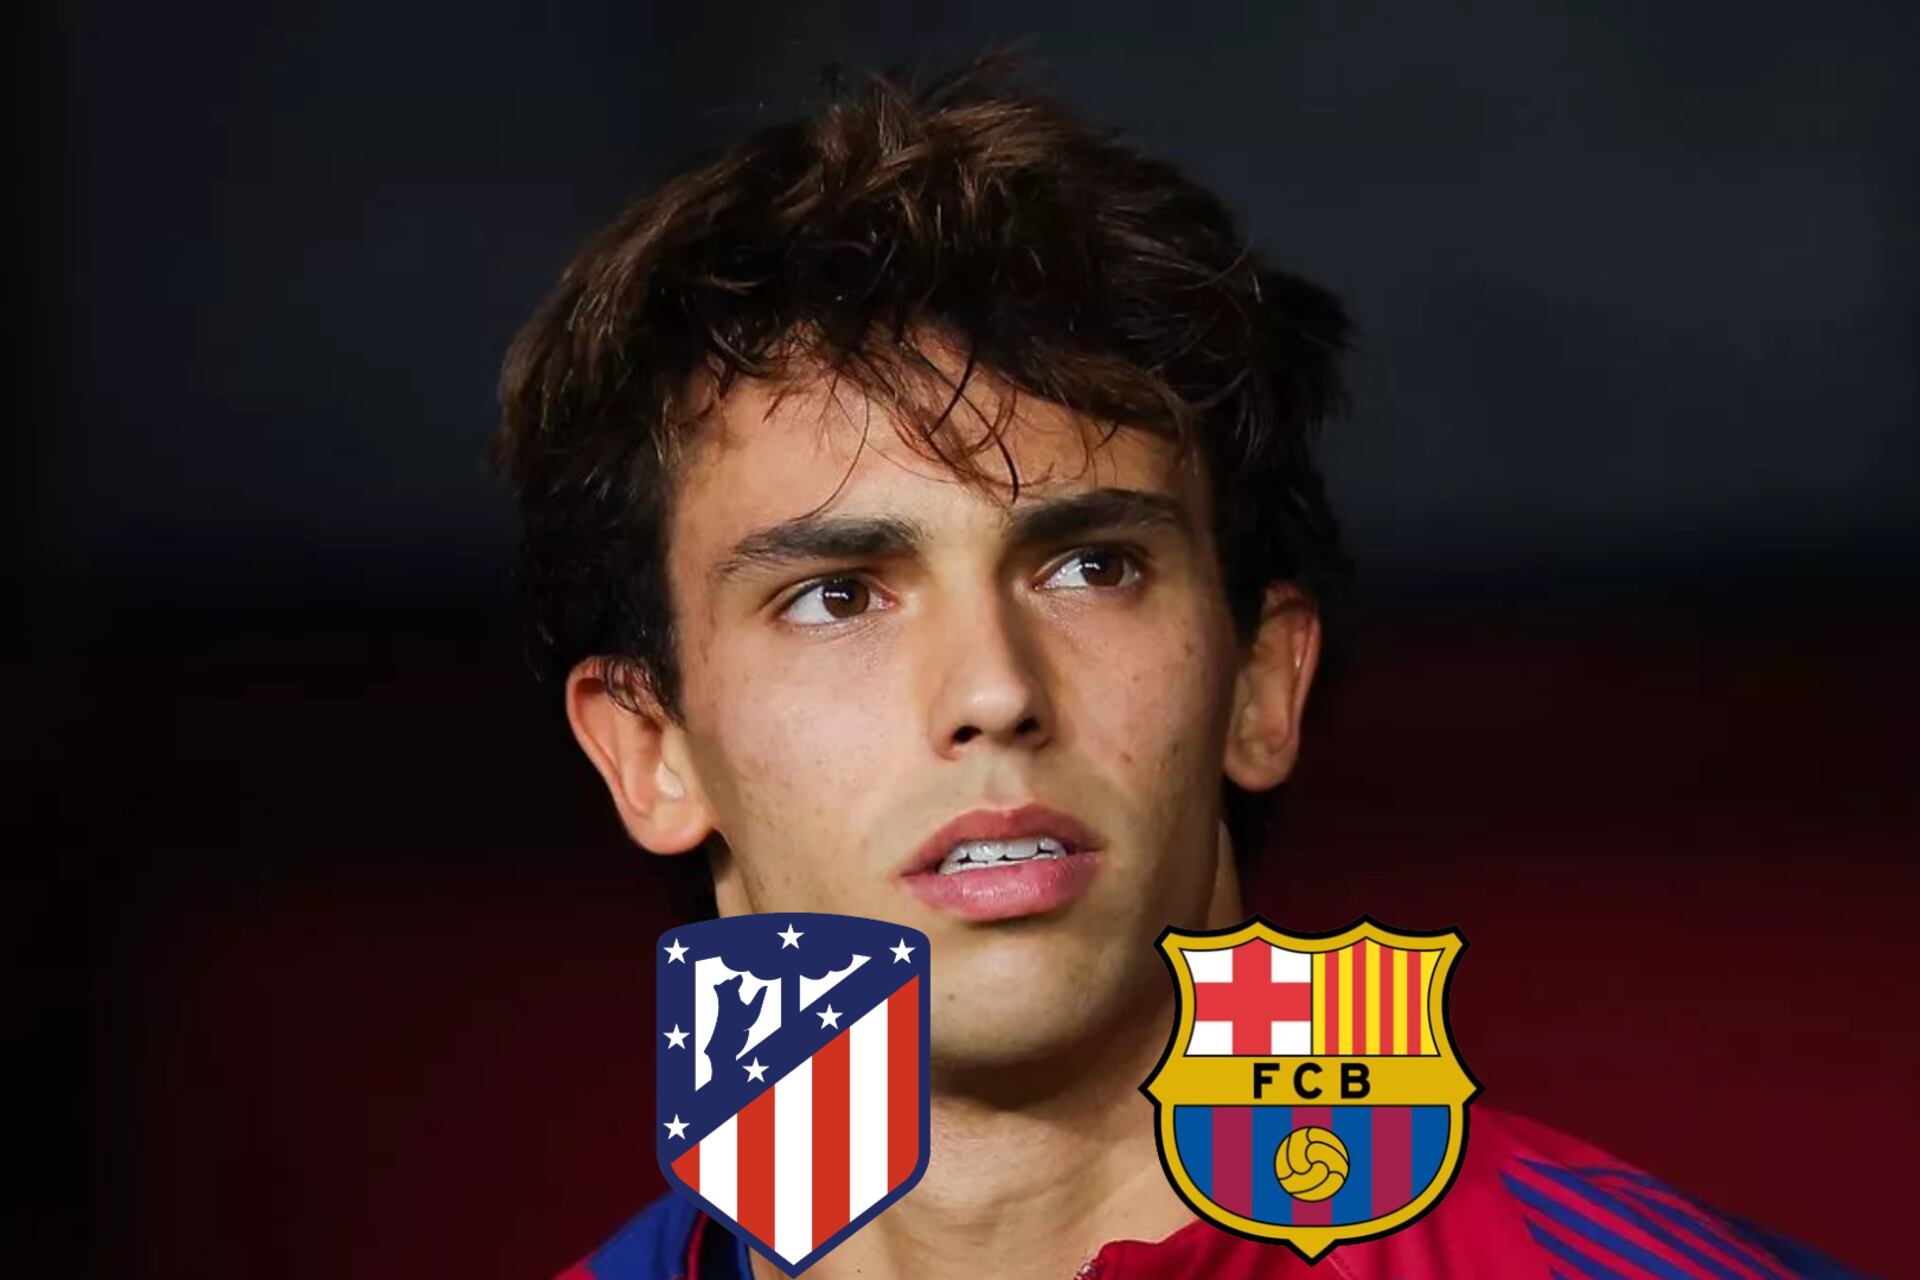 Joao Felix left Atl Madrid in the worst way, not a starter at Barca and his Champions predictions are a joke in Europe